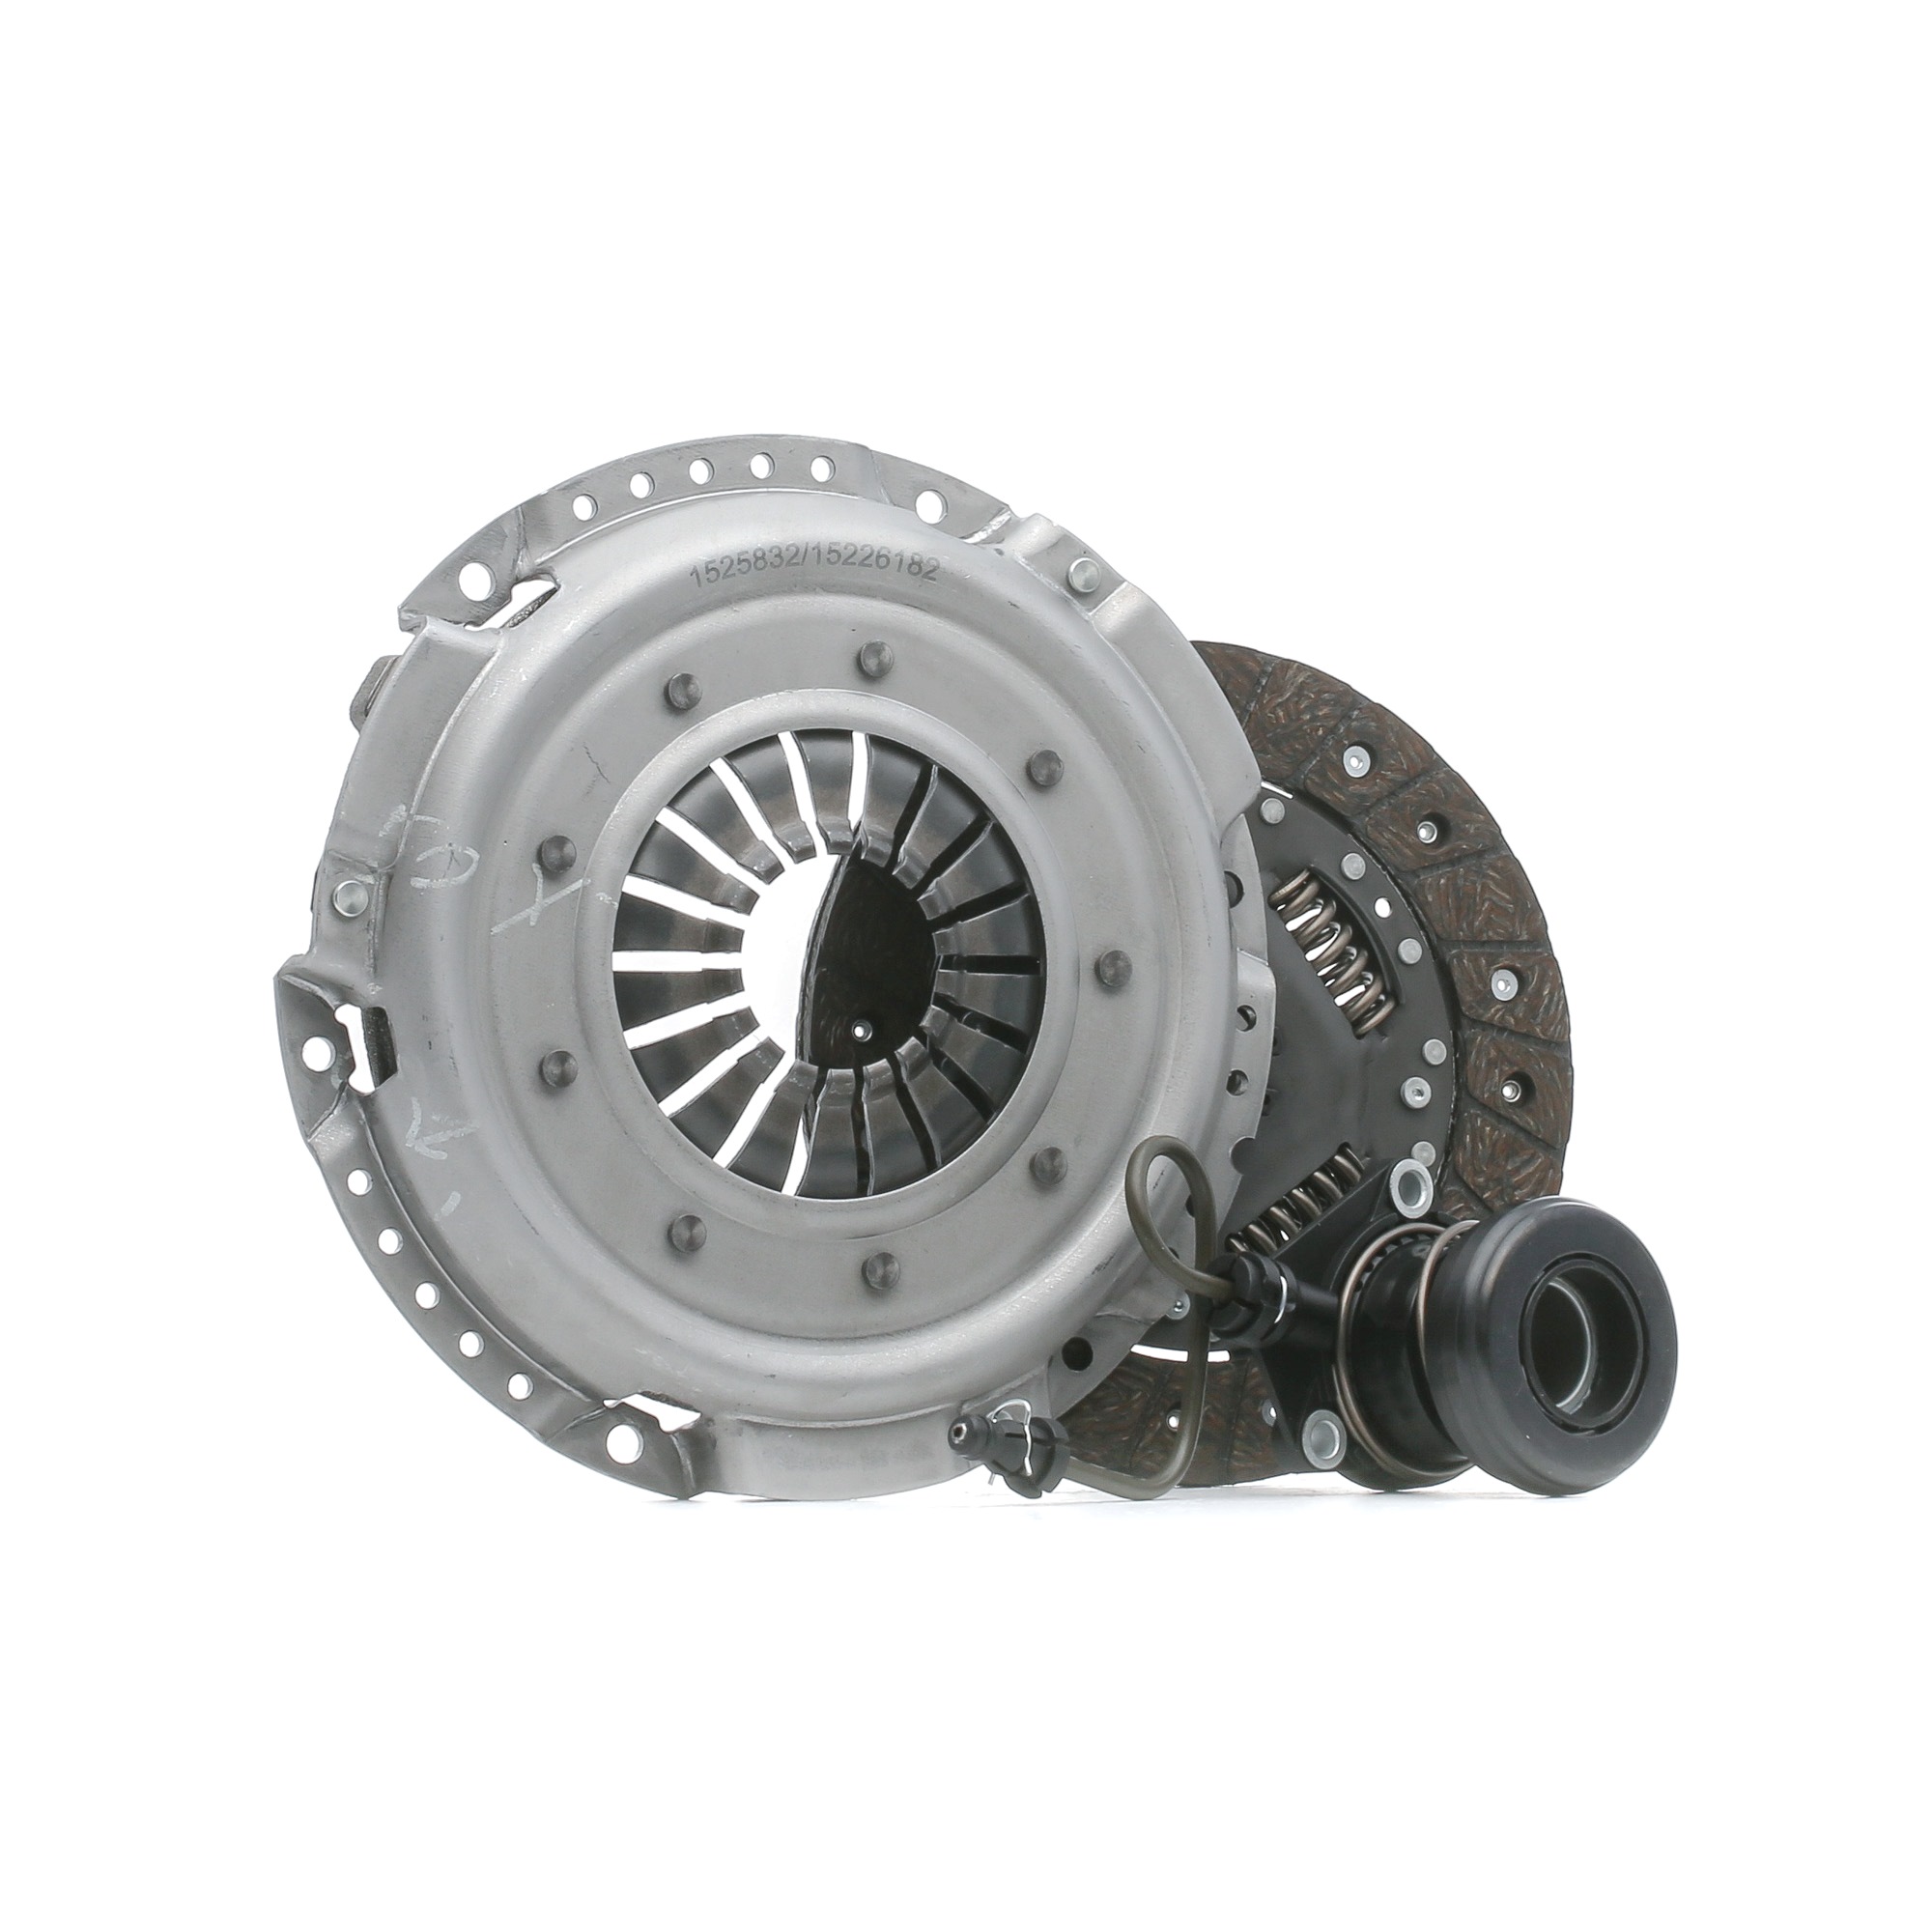 RIDEX 479C0482 OPEL ASTRA 2001 Clutch replacement kit